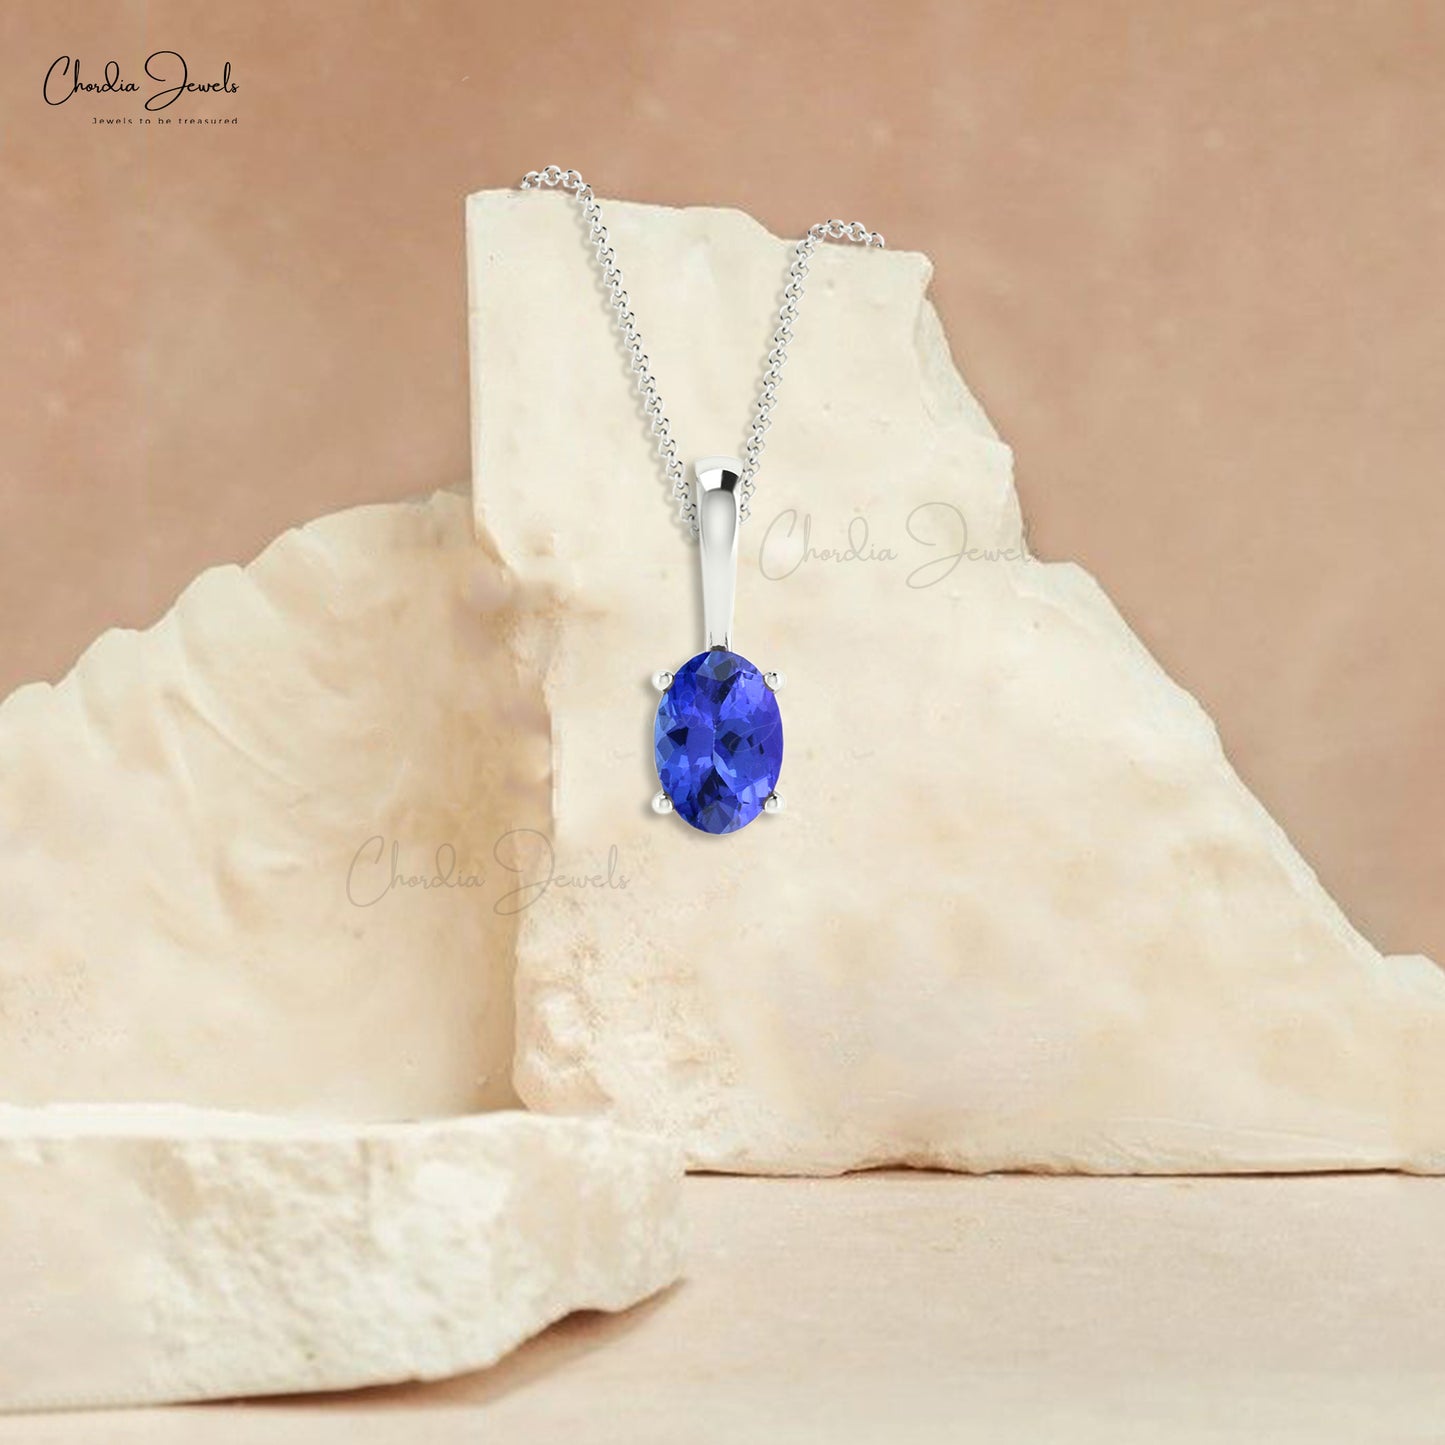 Delicate Tanzanite December Birthstone Pendant 0.54Ct Oval Cut Handmade Pendant 14k Real Gold Hallmarked Fine Jewelry For Her